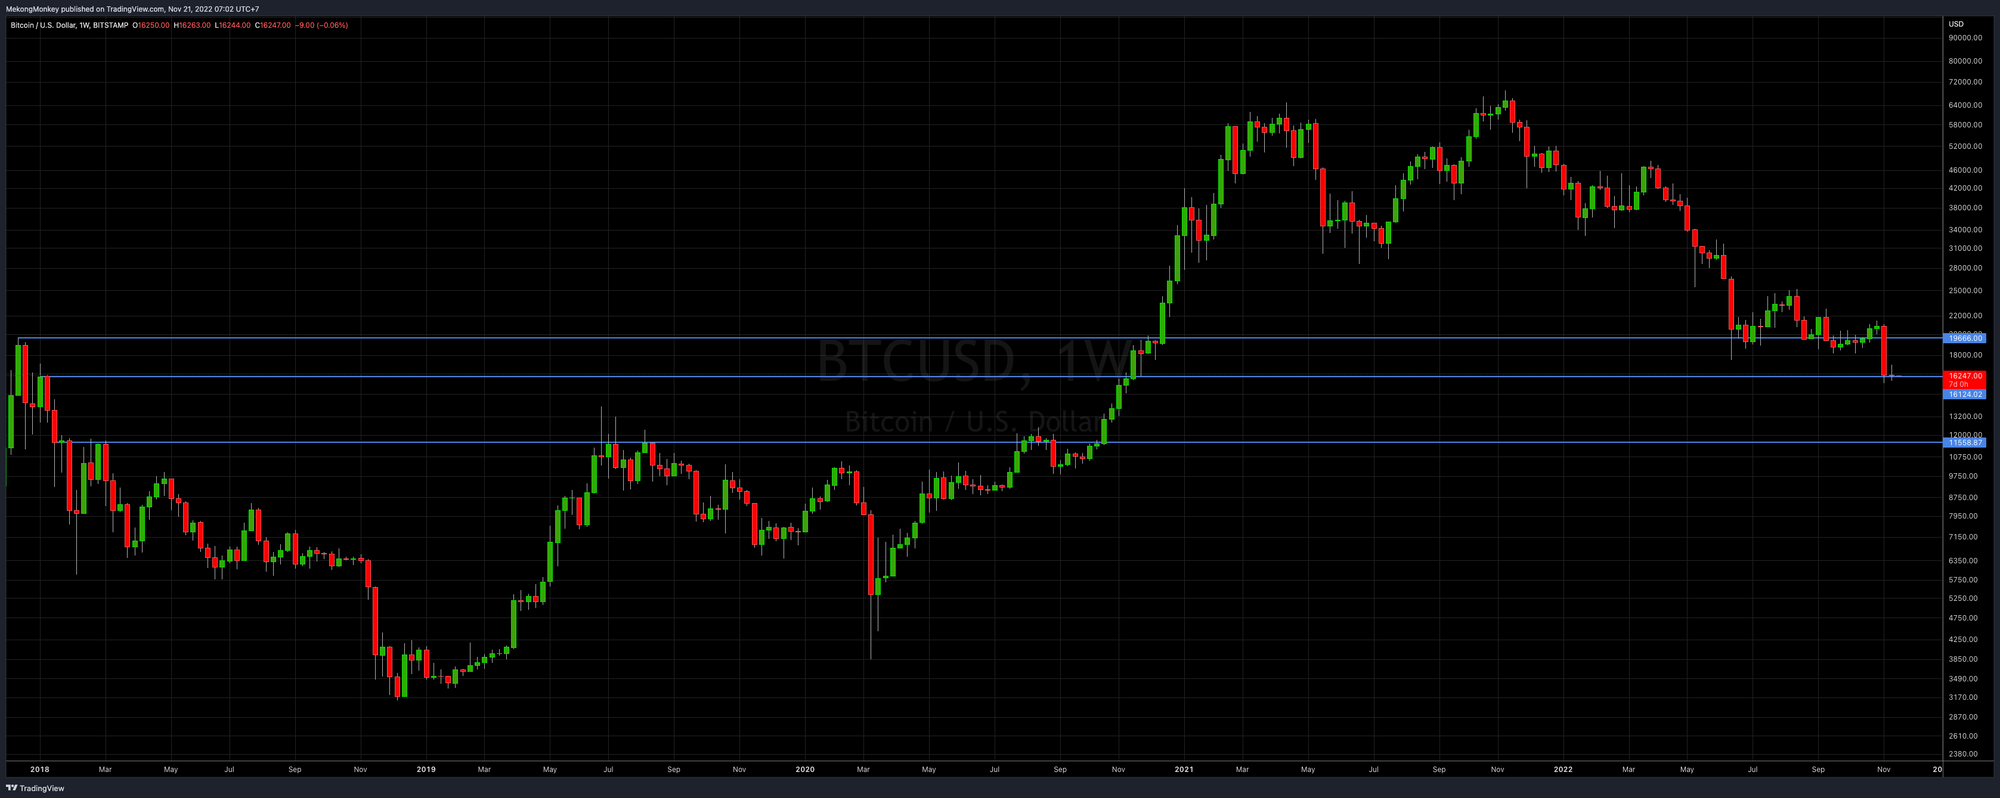 BTCUSD, weekly chart with major nearby HSR levels